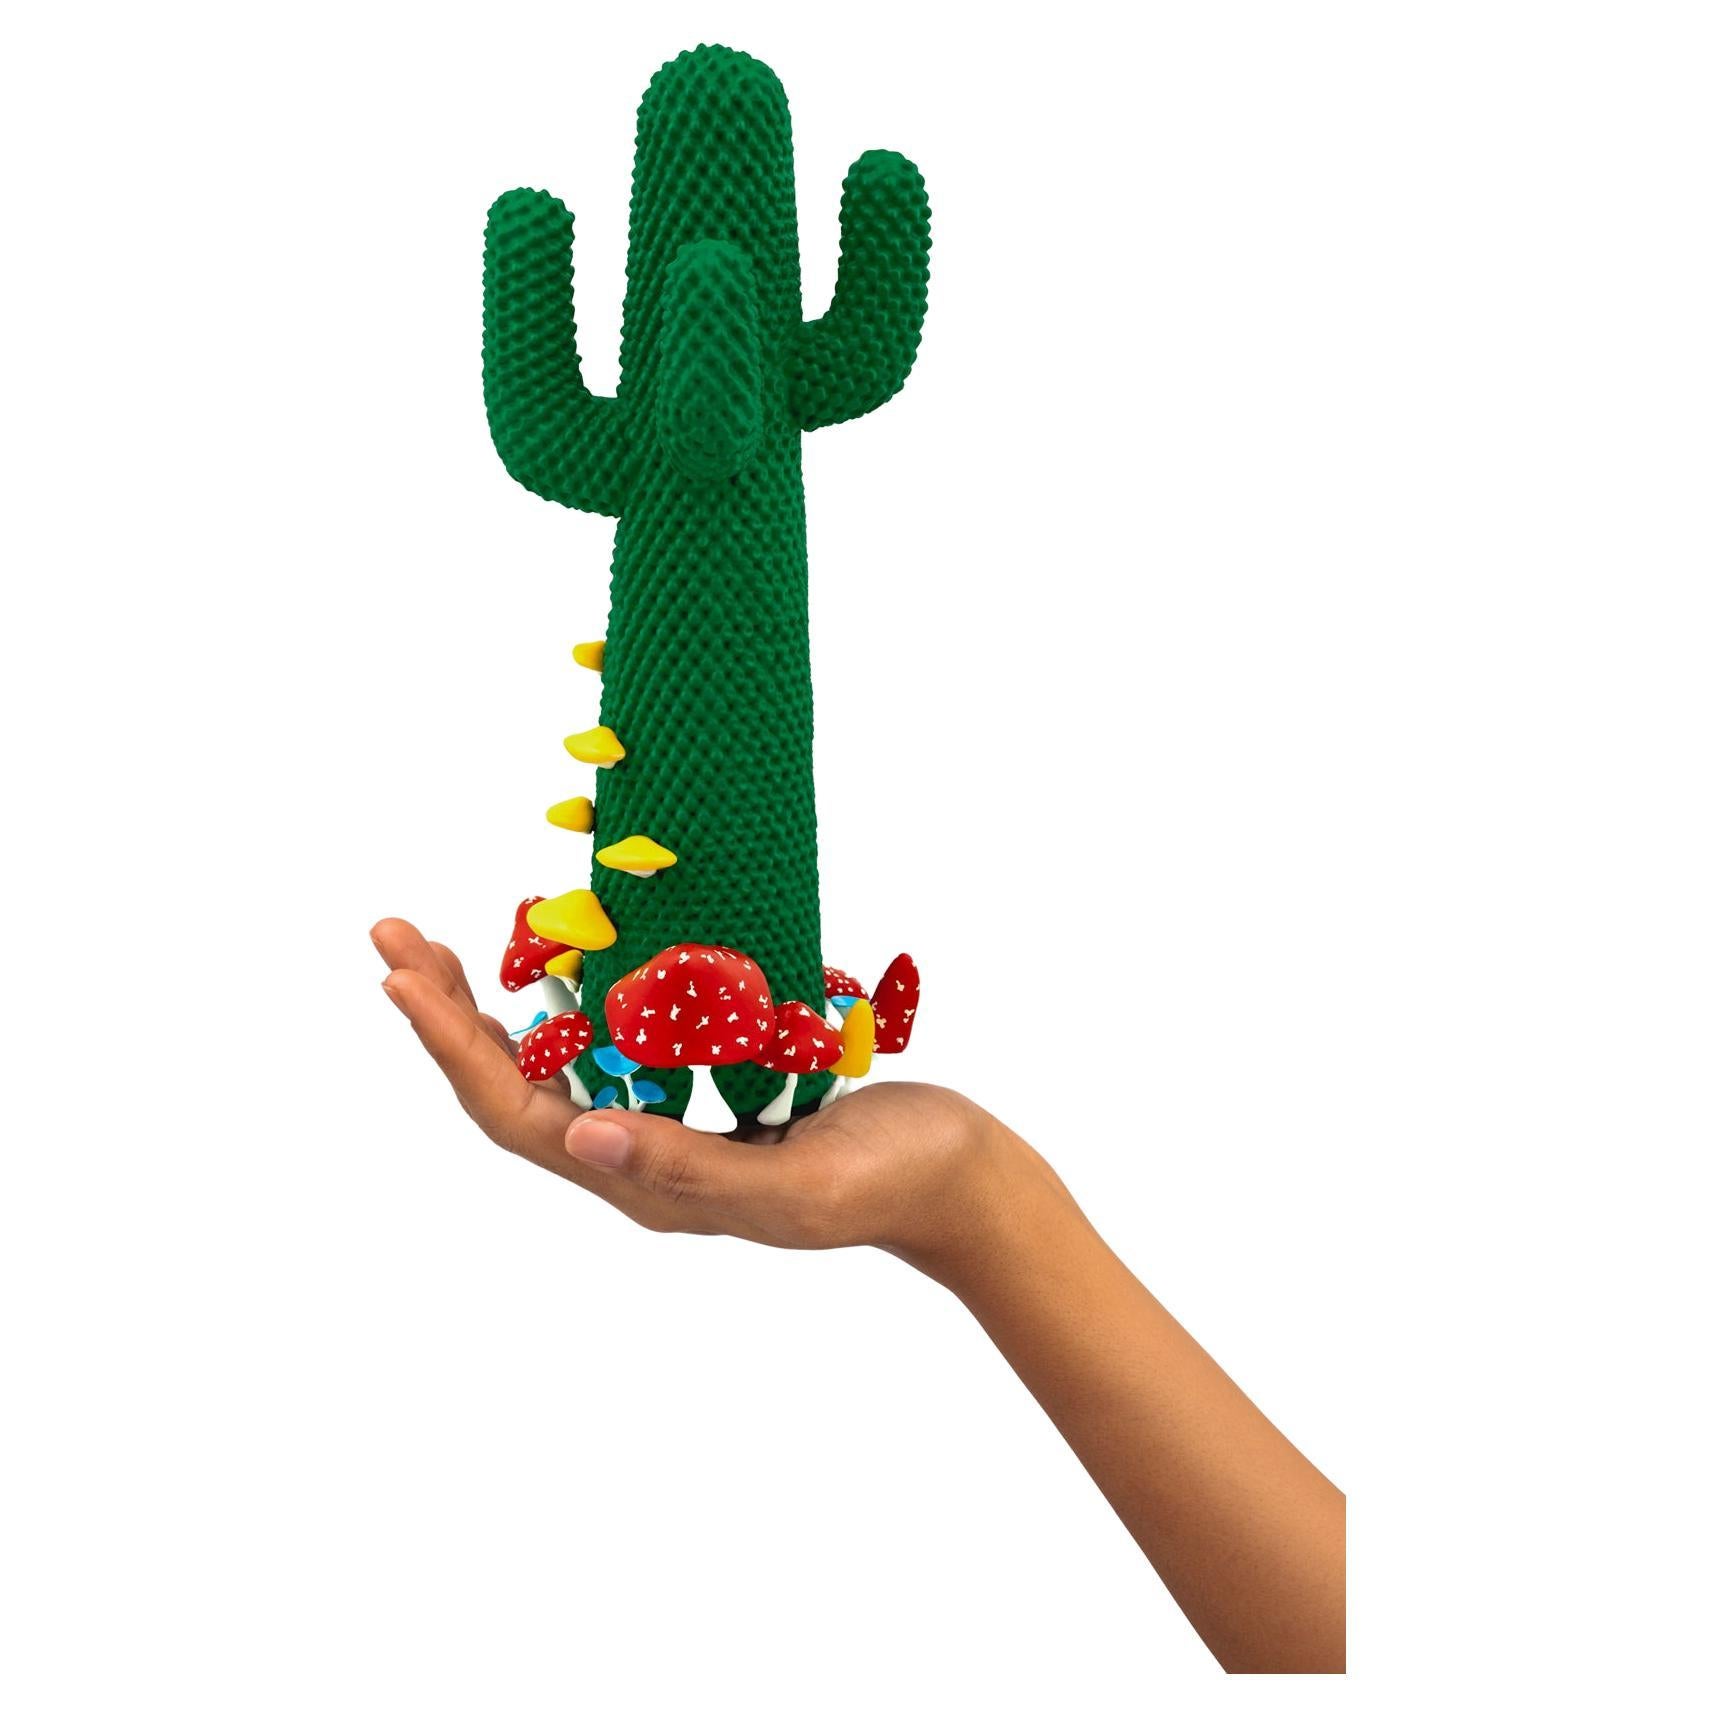 Limited Edition #91/99

Gufram presents the miniaturised version of the Shroom CACTUS® created in collaboration with A$AP Rocky and the artist’s new design studio HOMMEMADE Exactly as the real-Size Shroom CACTUS®, the new Guframini piece features